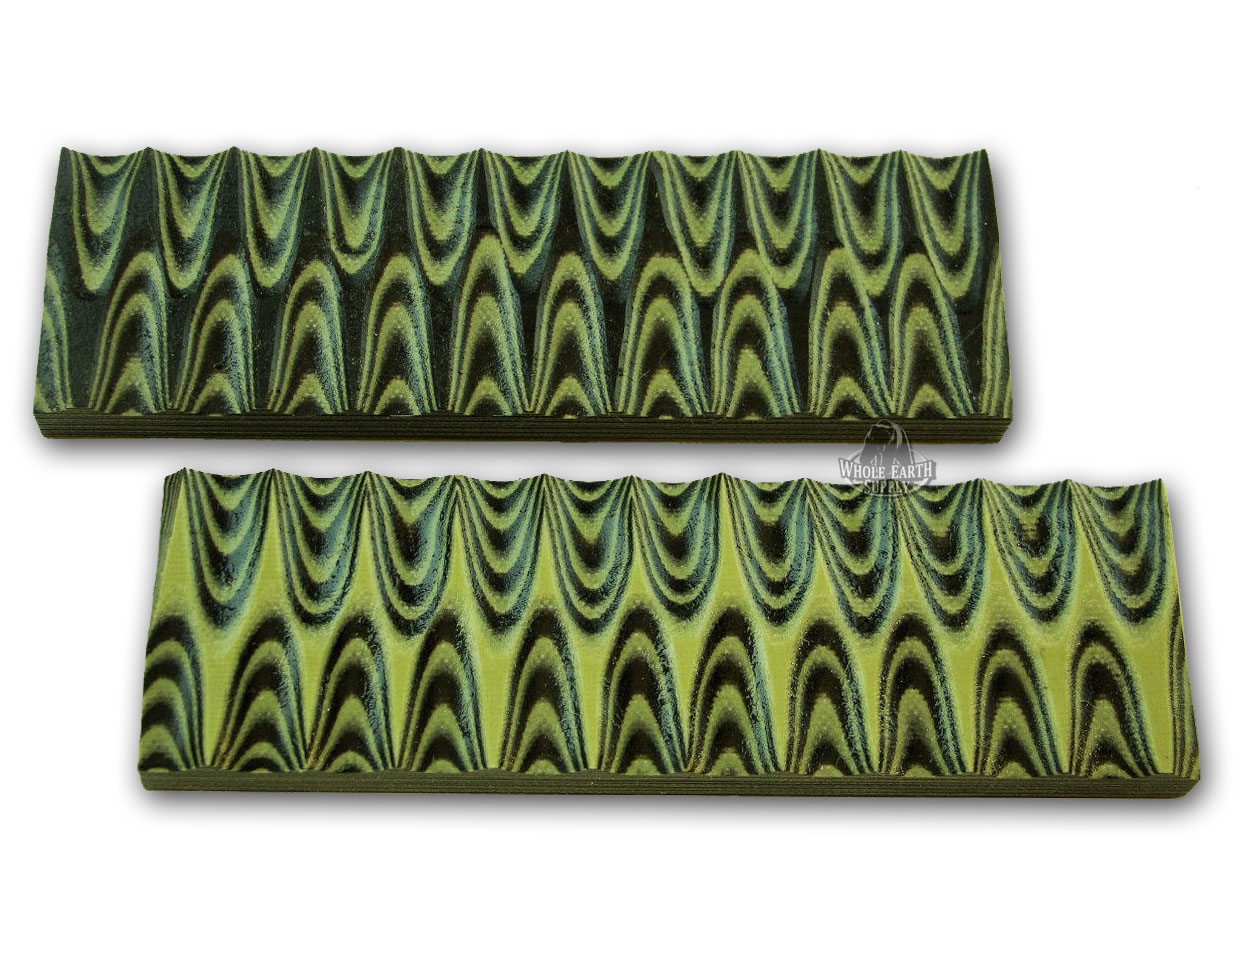 G-10 G10 Green Black Quality Handle Scales Knives Gun Grips Knife 5in Making Grips Set Pair